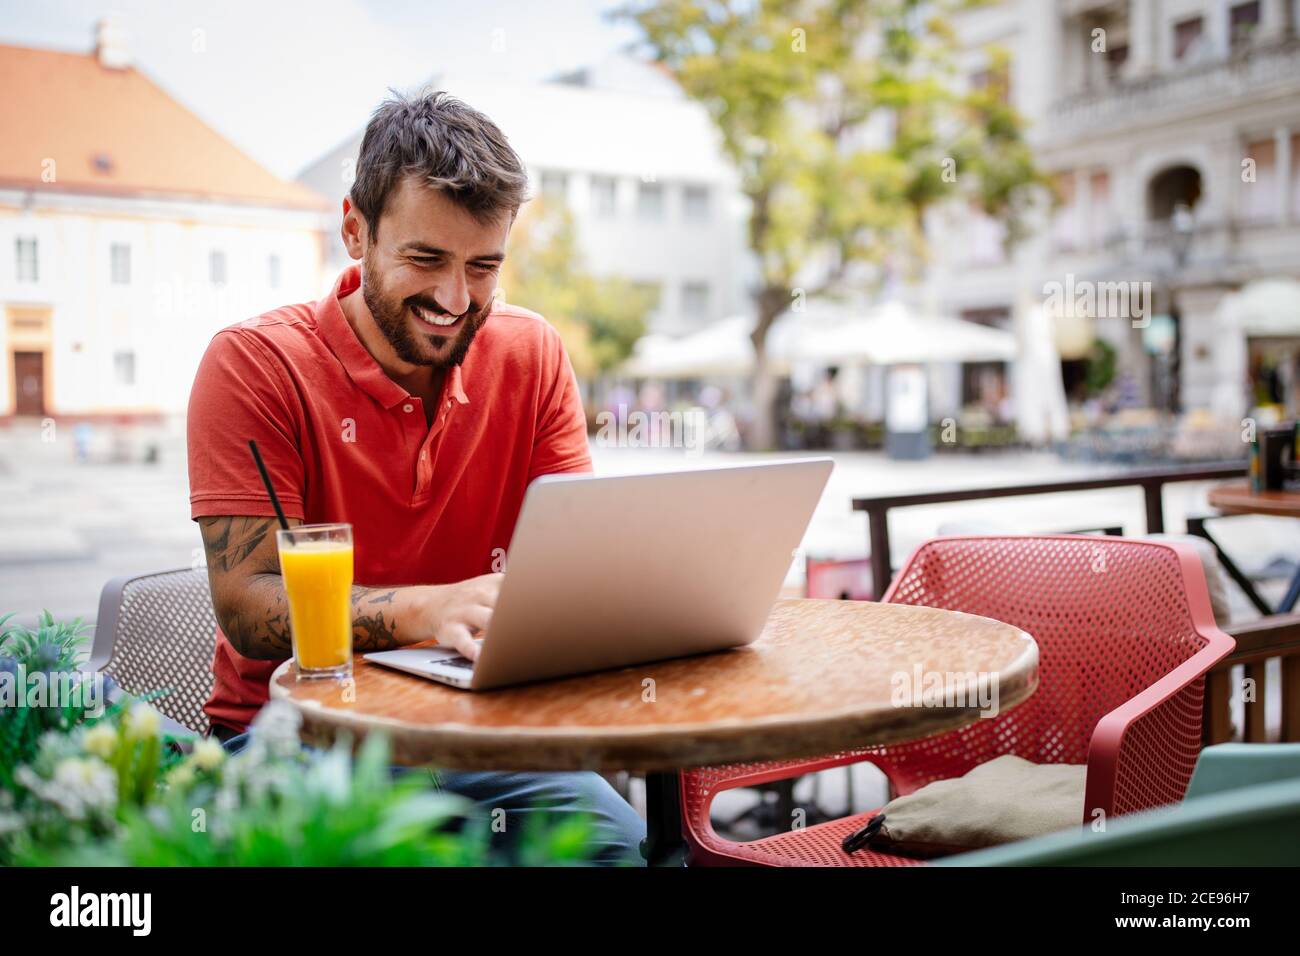 Handsome young man with laptop enjoying his free time in cafe Stock Photo